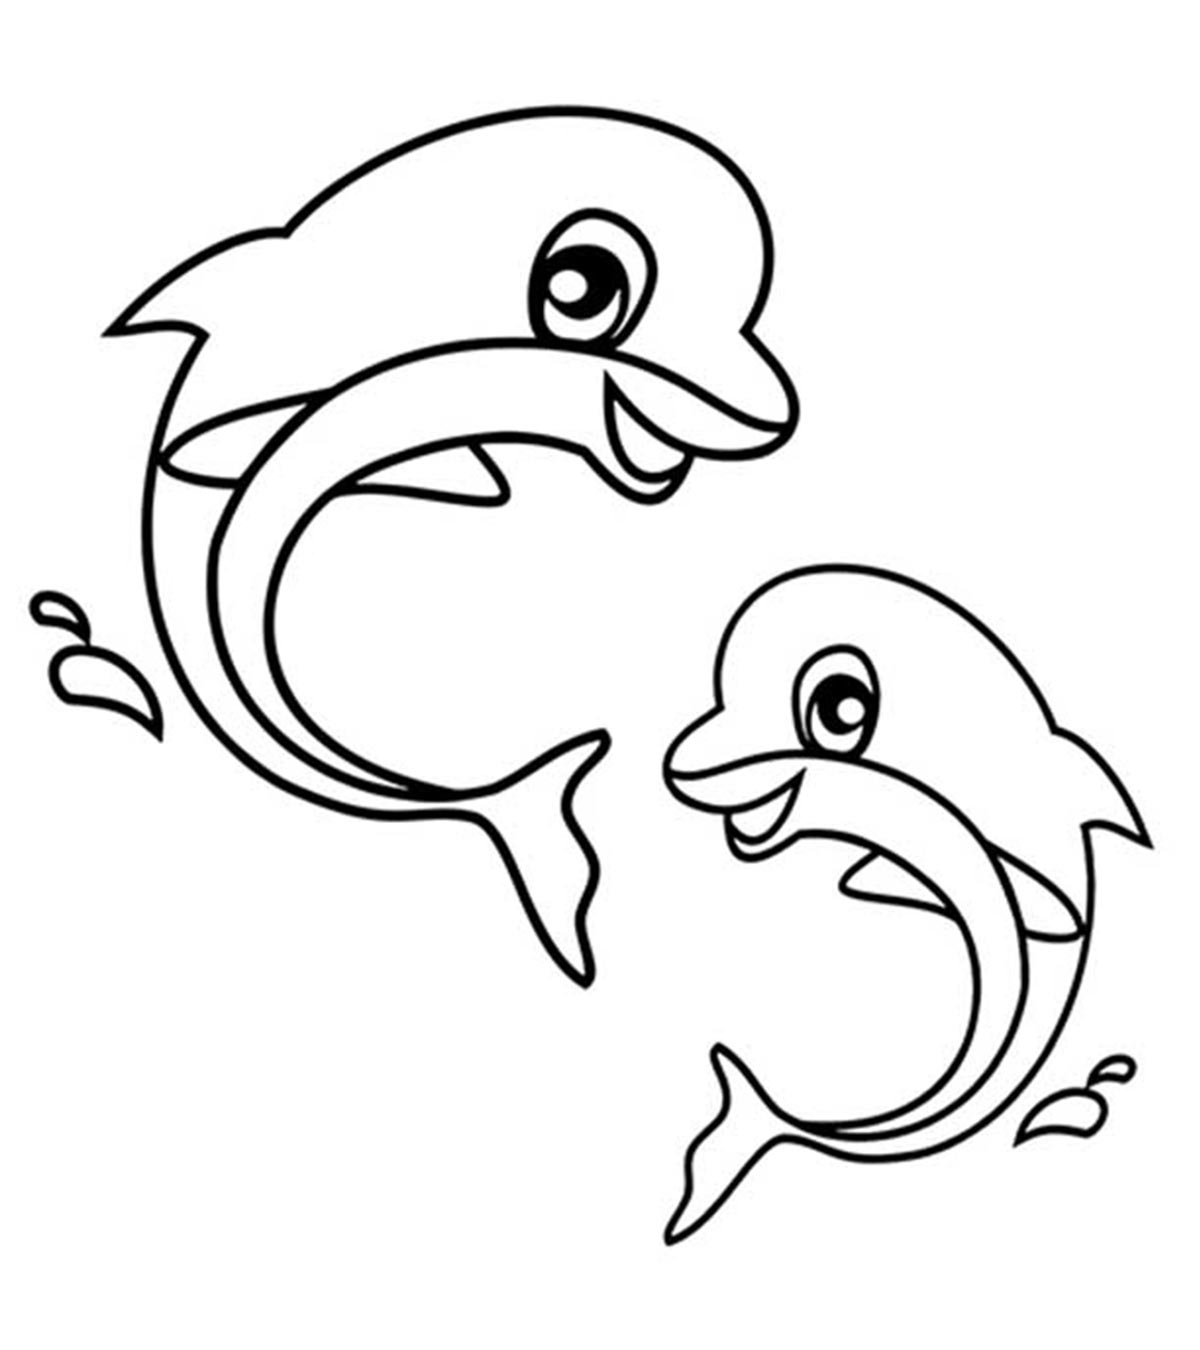 15 Amazing Sea Animals Coloring Pages For Your Little Ones_image